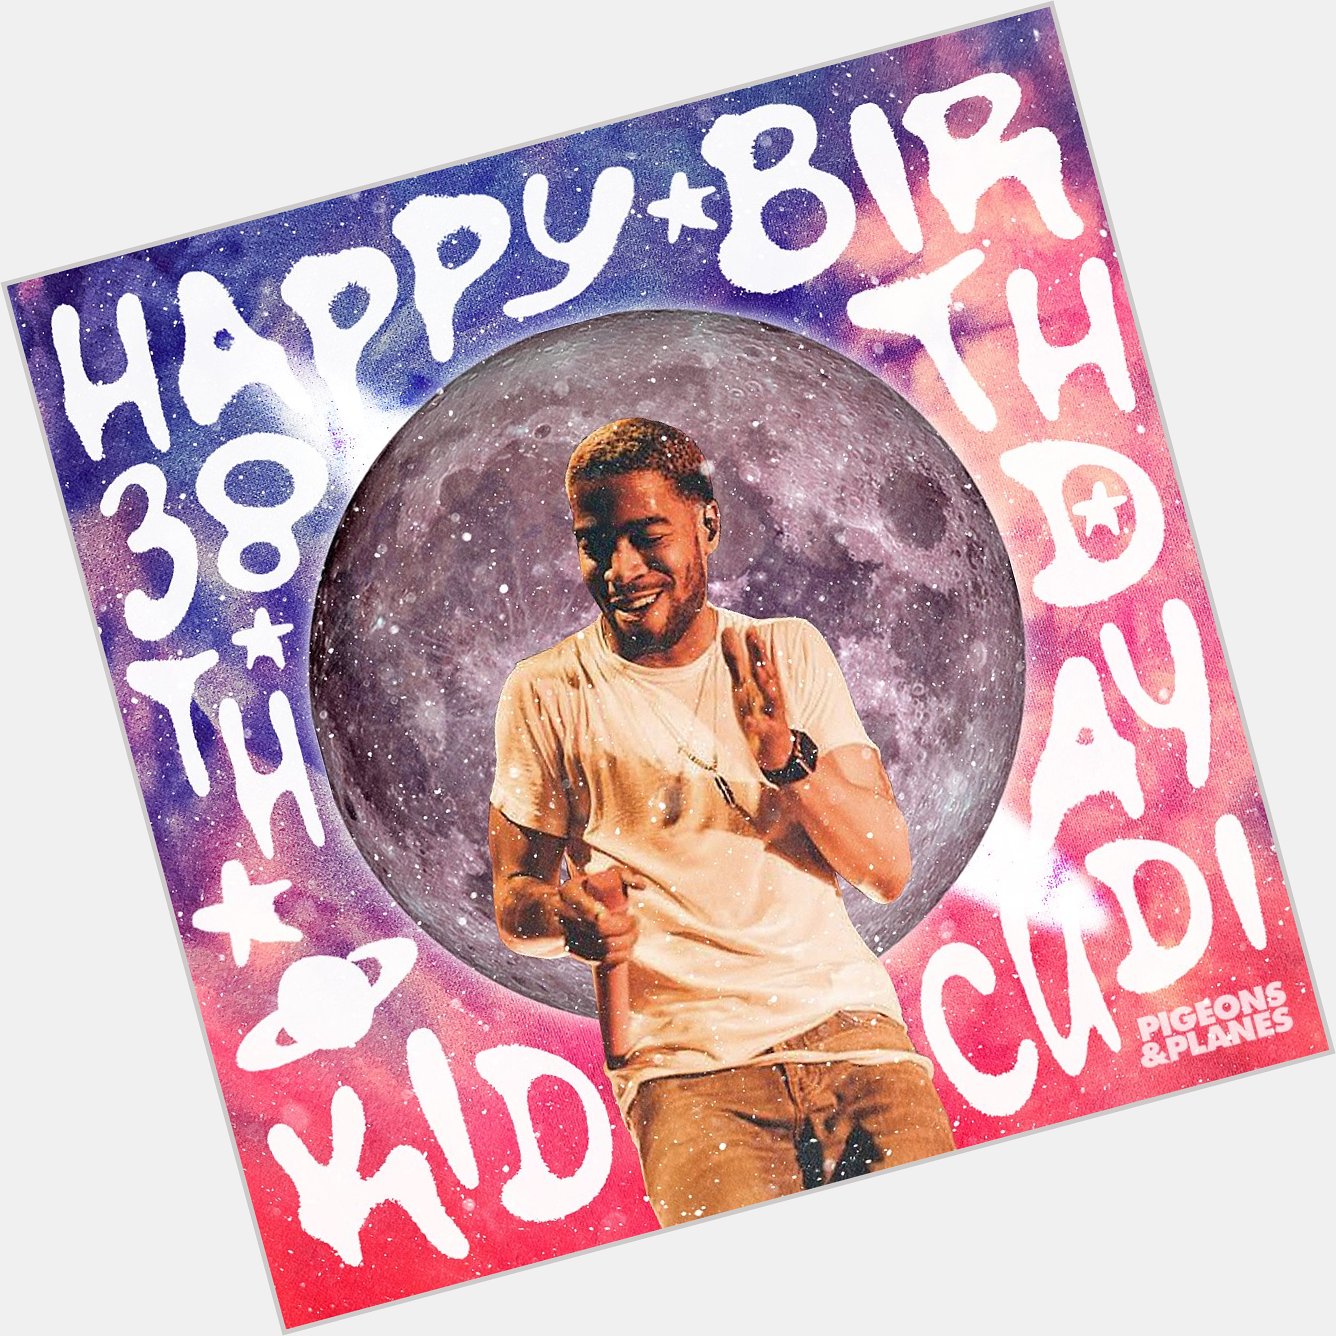 Happy birthday to Kid Cudi, who turns 38 today   